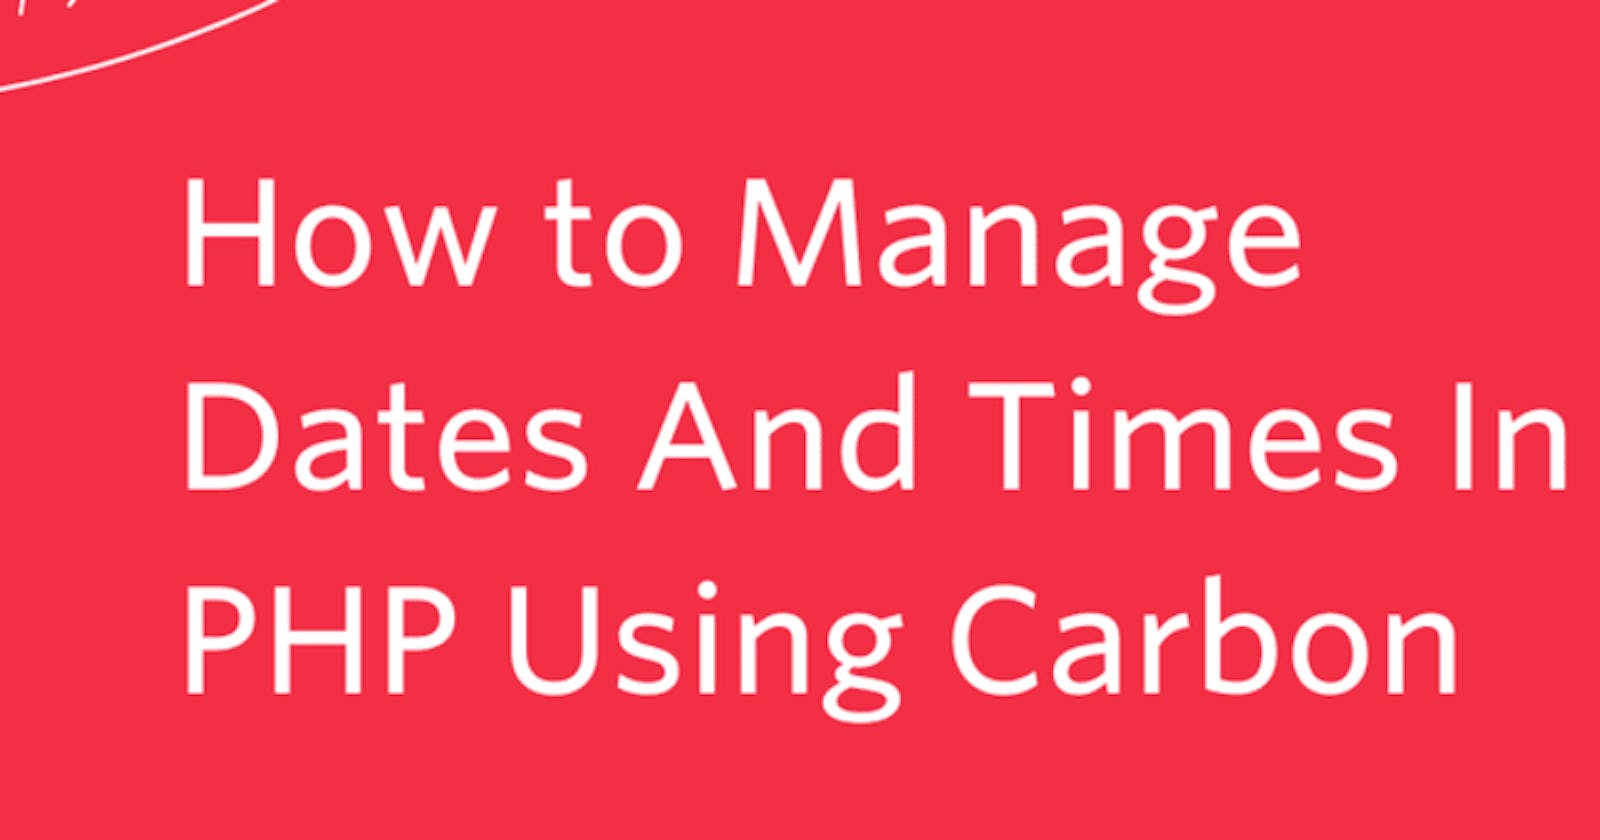 How to Manage Dates and Times in PHP Using Carbon